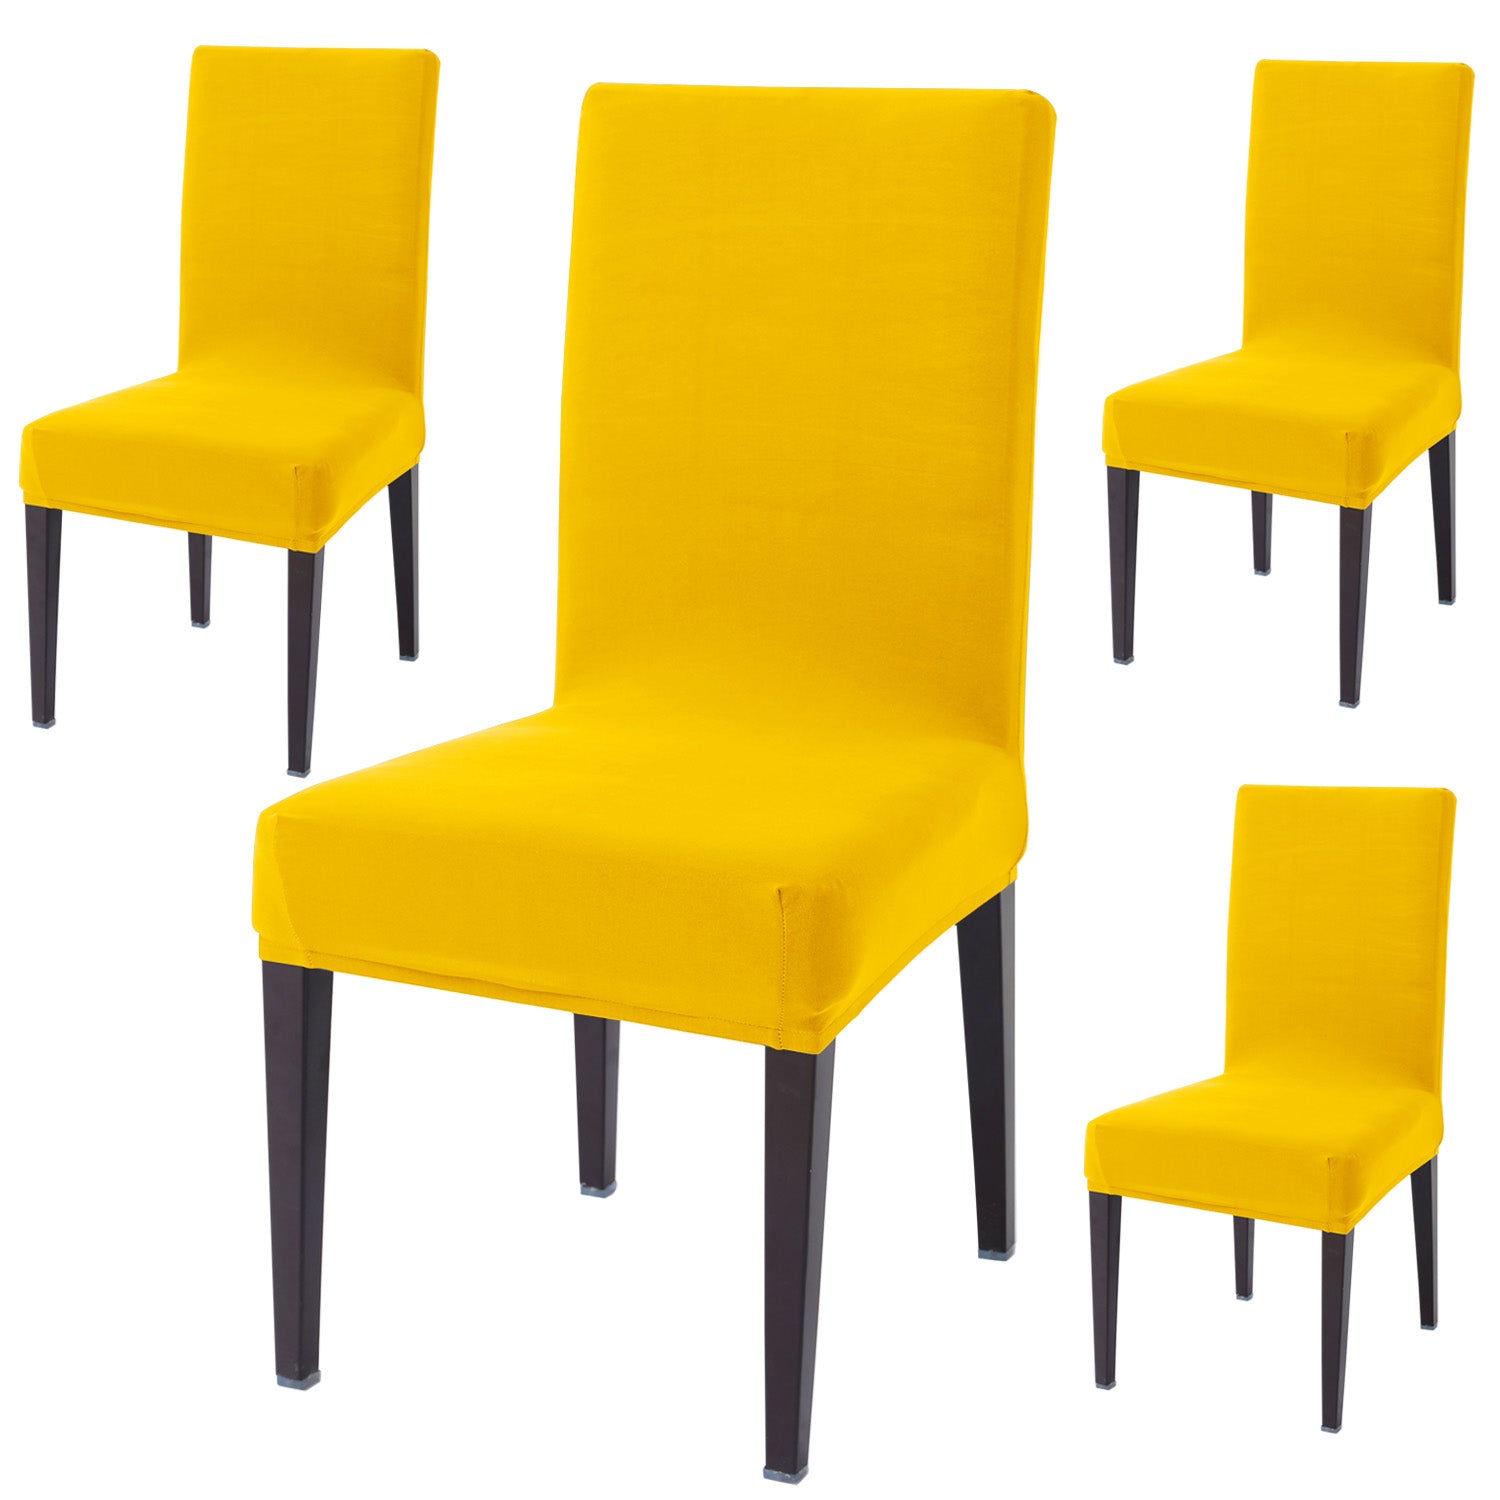 Elastic Stretchable Dining Chair Cover, Sunny Yellow